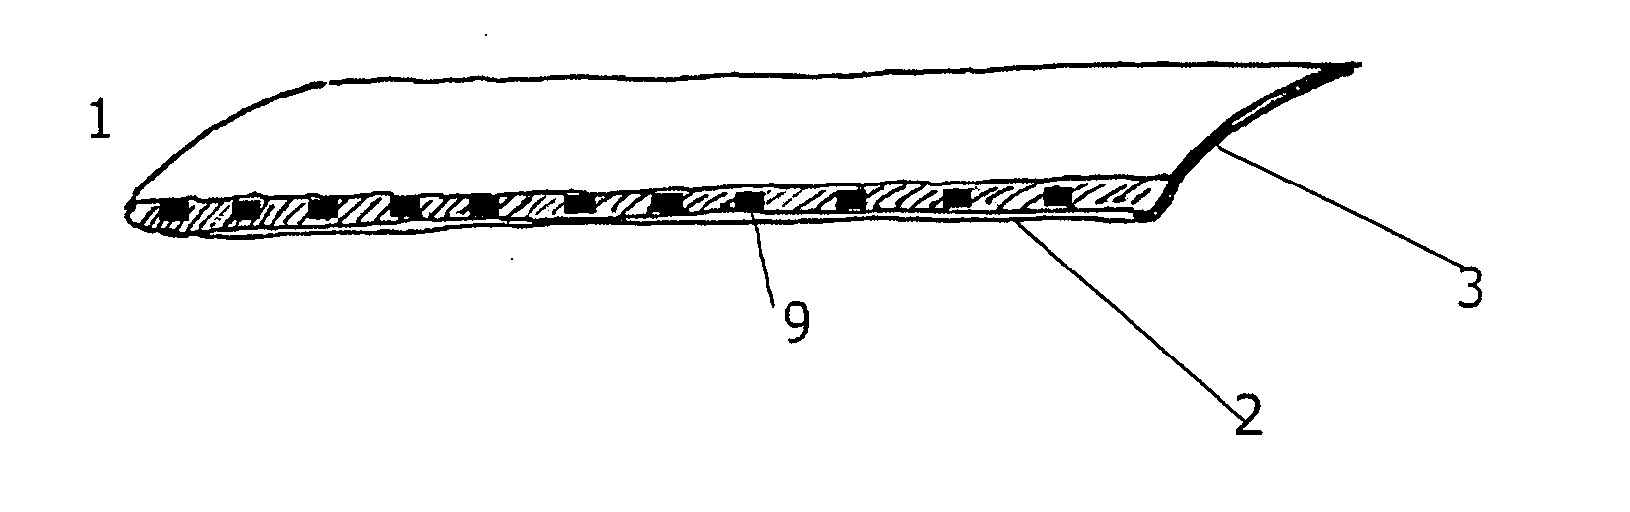 Blind device  for light protection and displaying of information